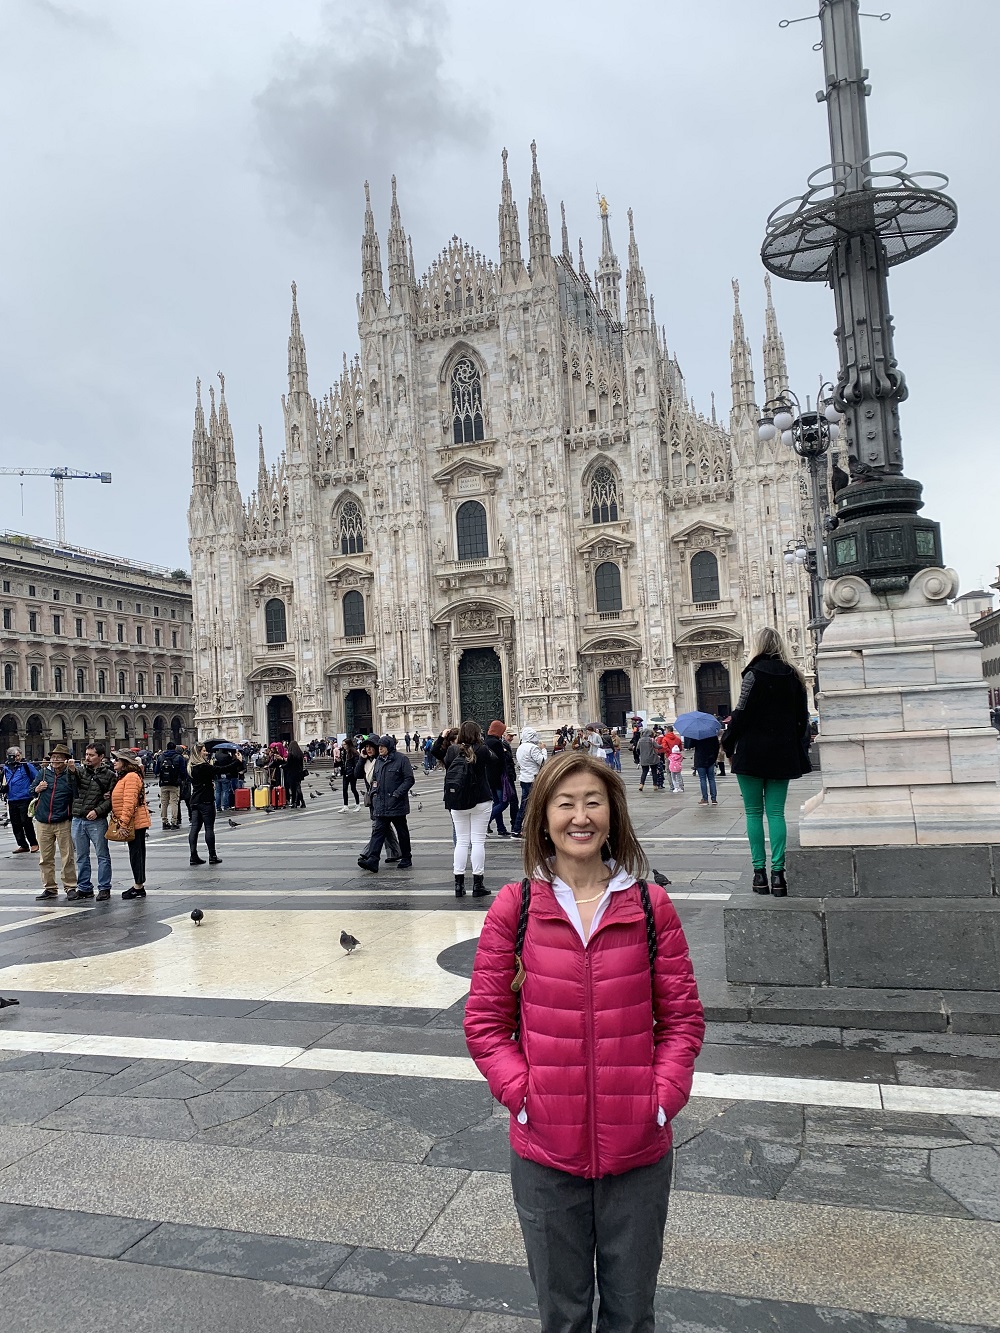 Dr. Chisa Yamada at Il Duomo, Milan, Italy on one of her many travels